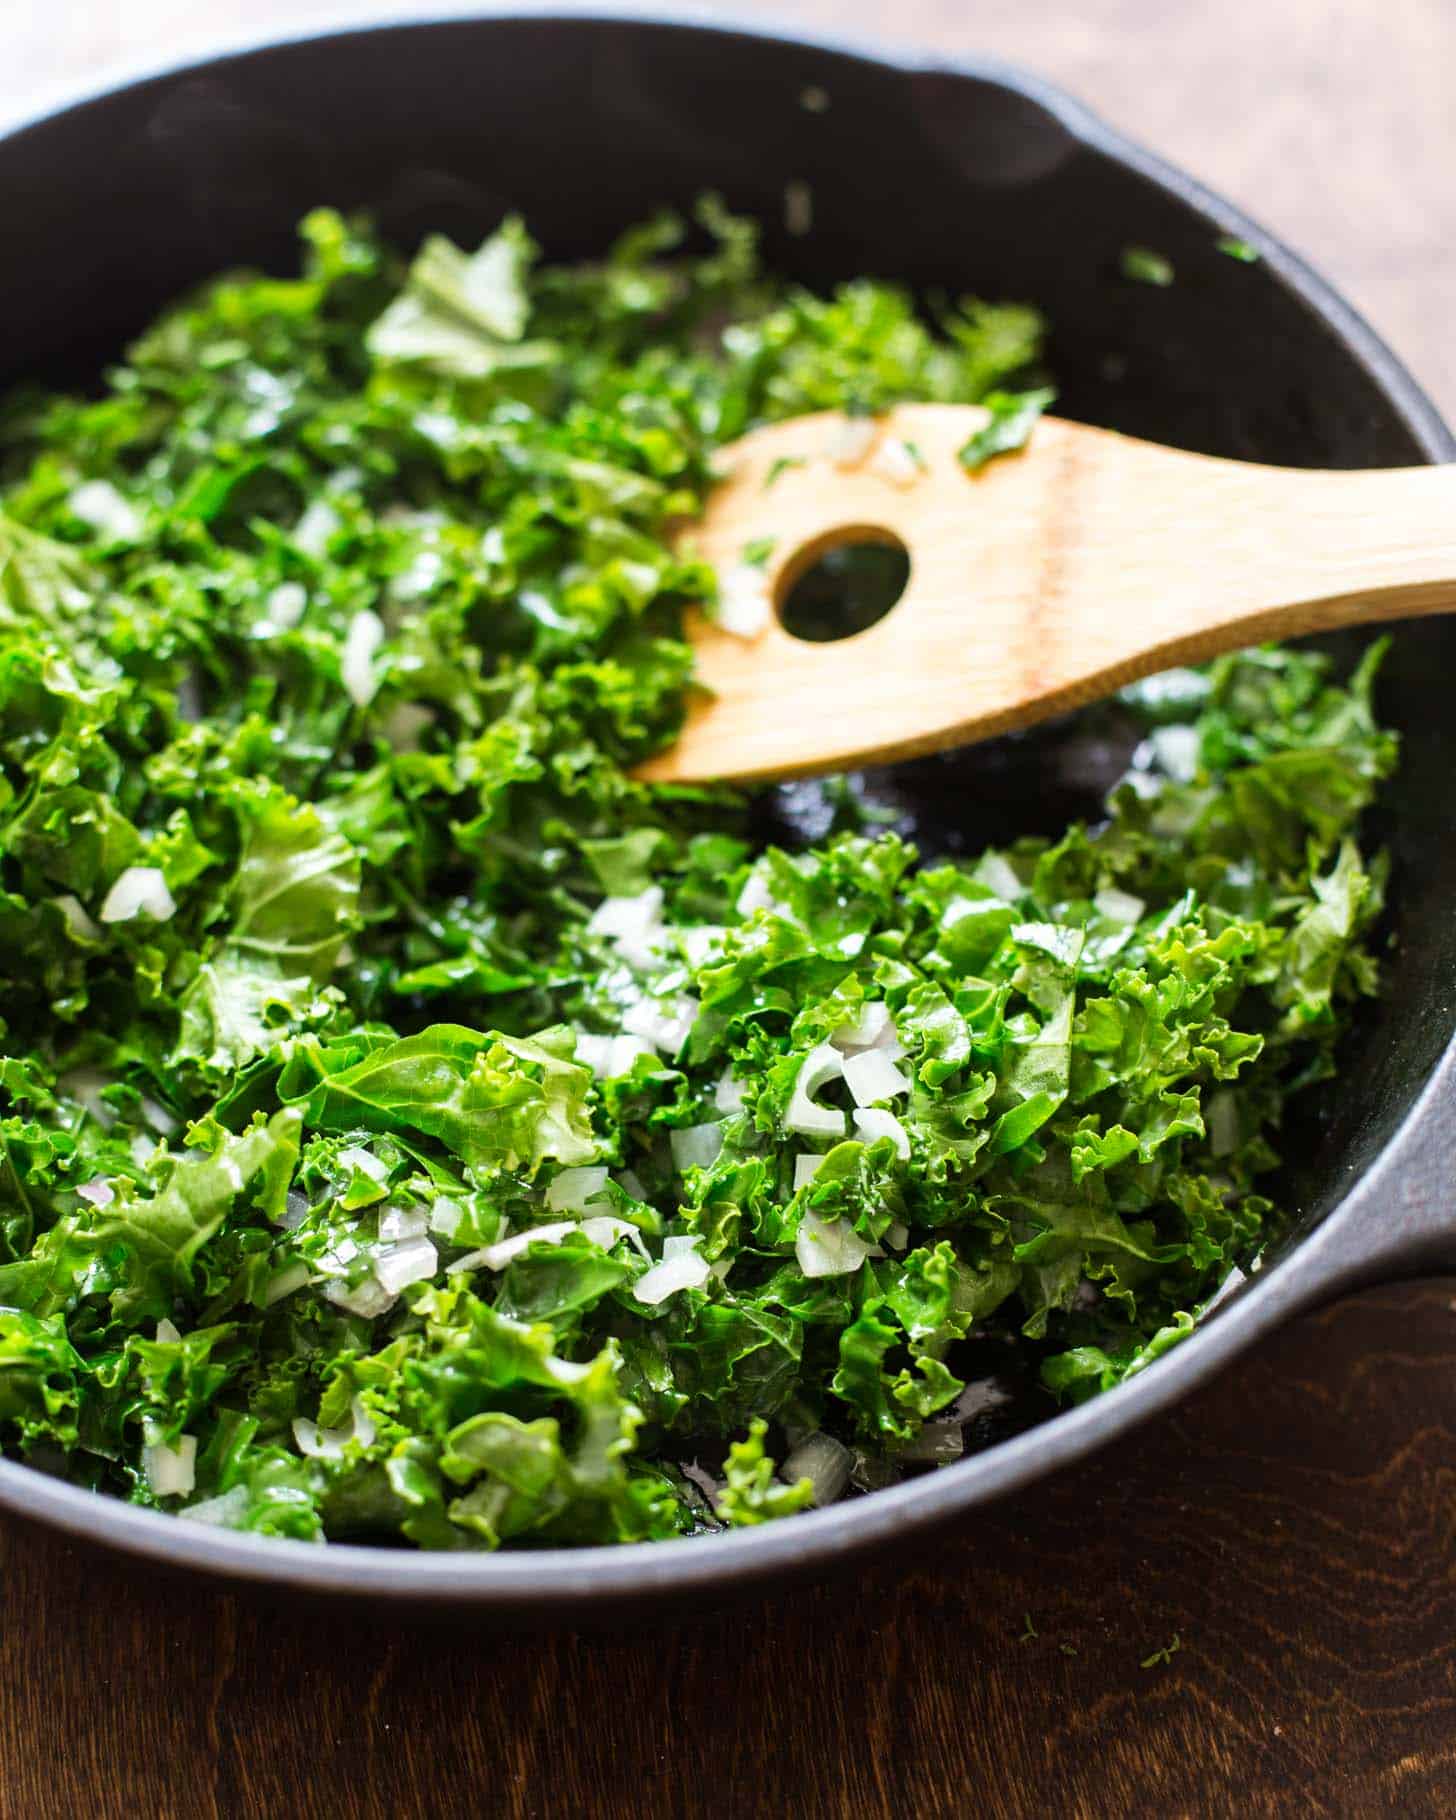 Cooking kale in a cast iron skillet